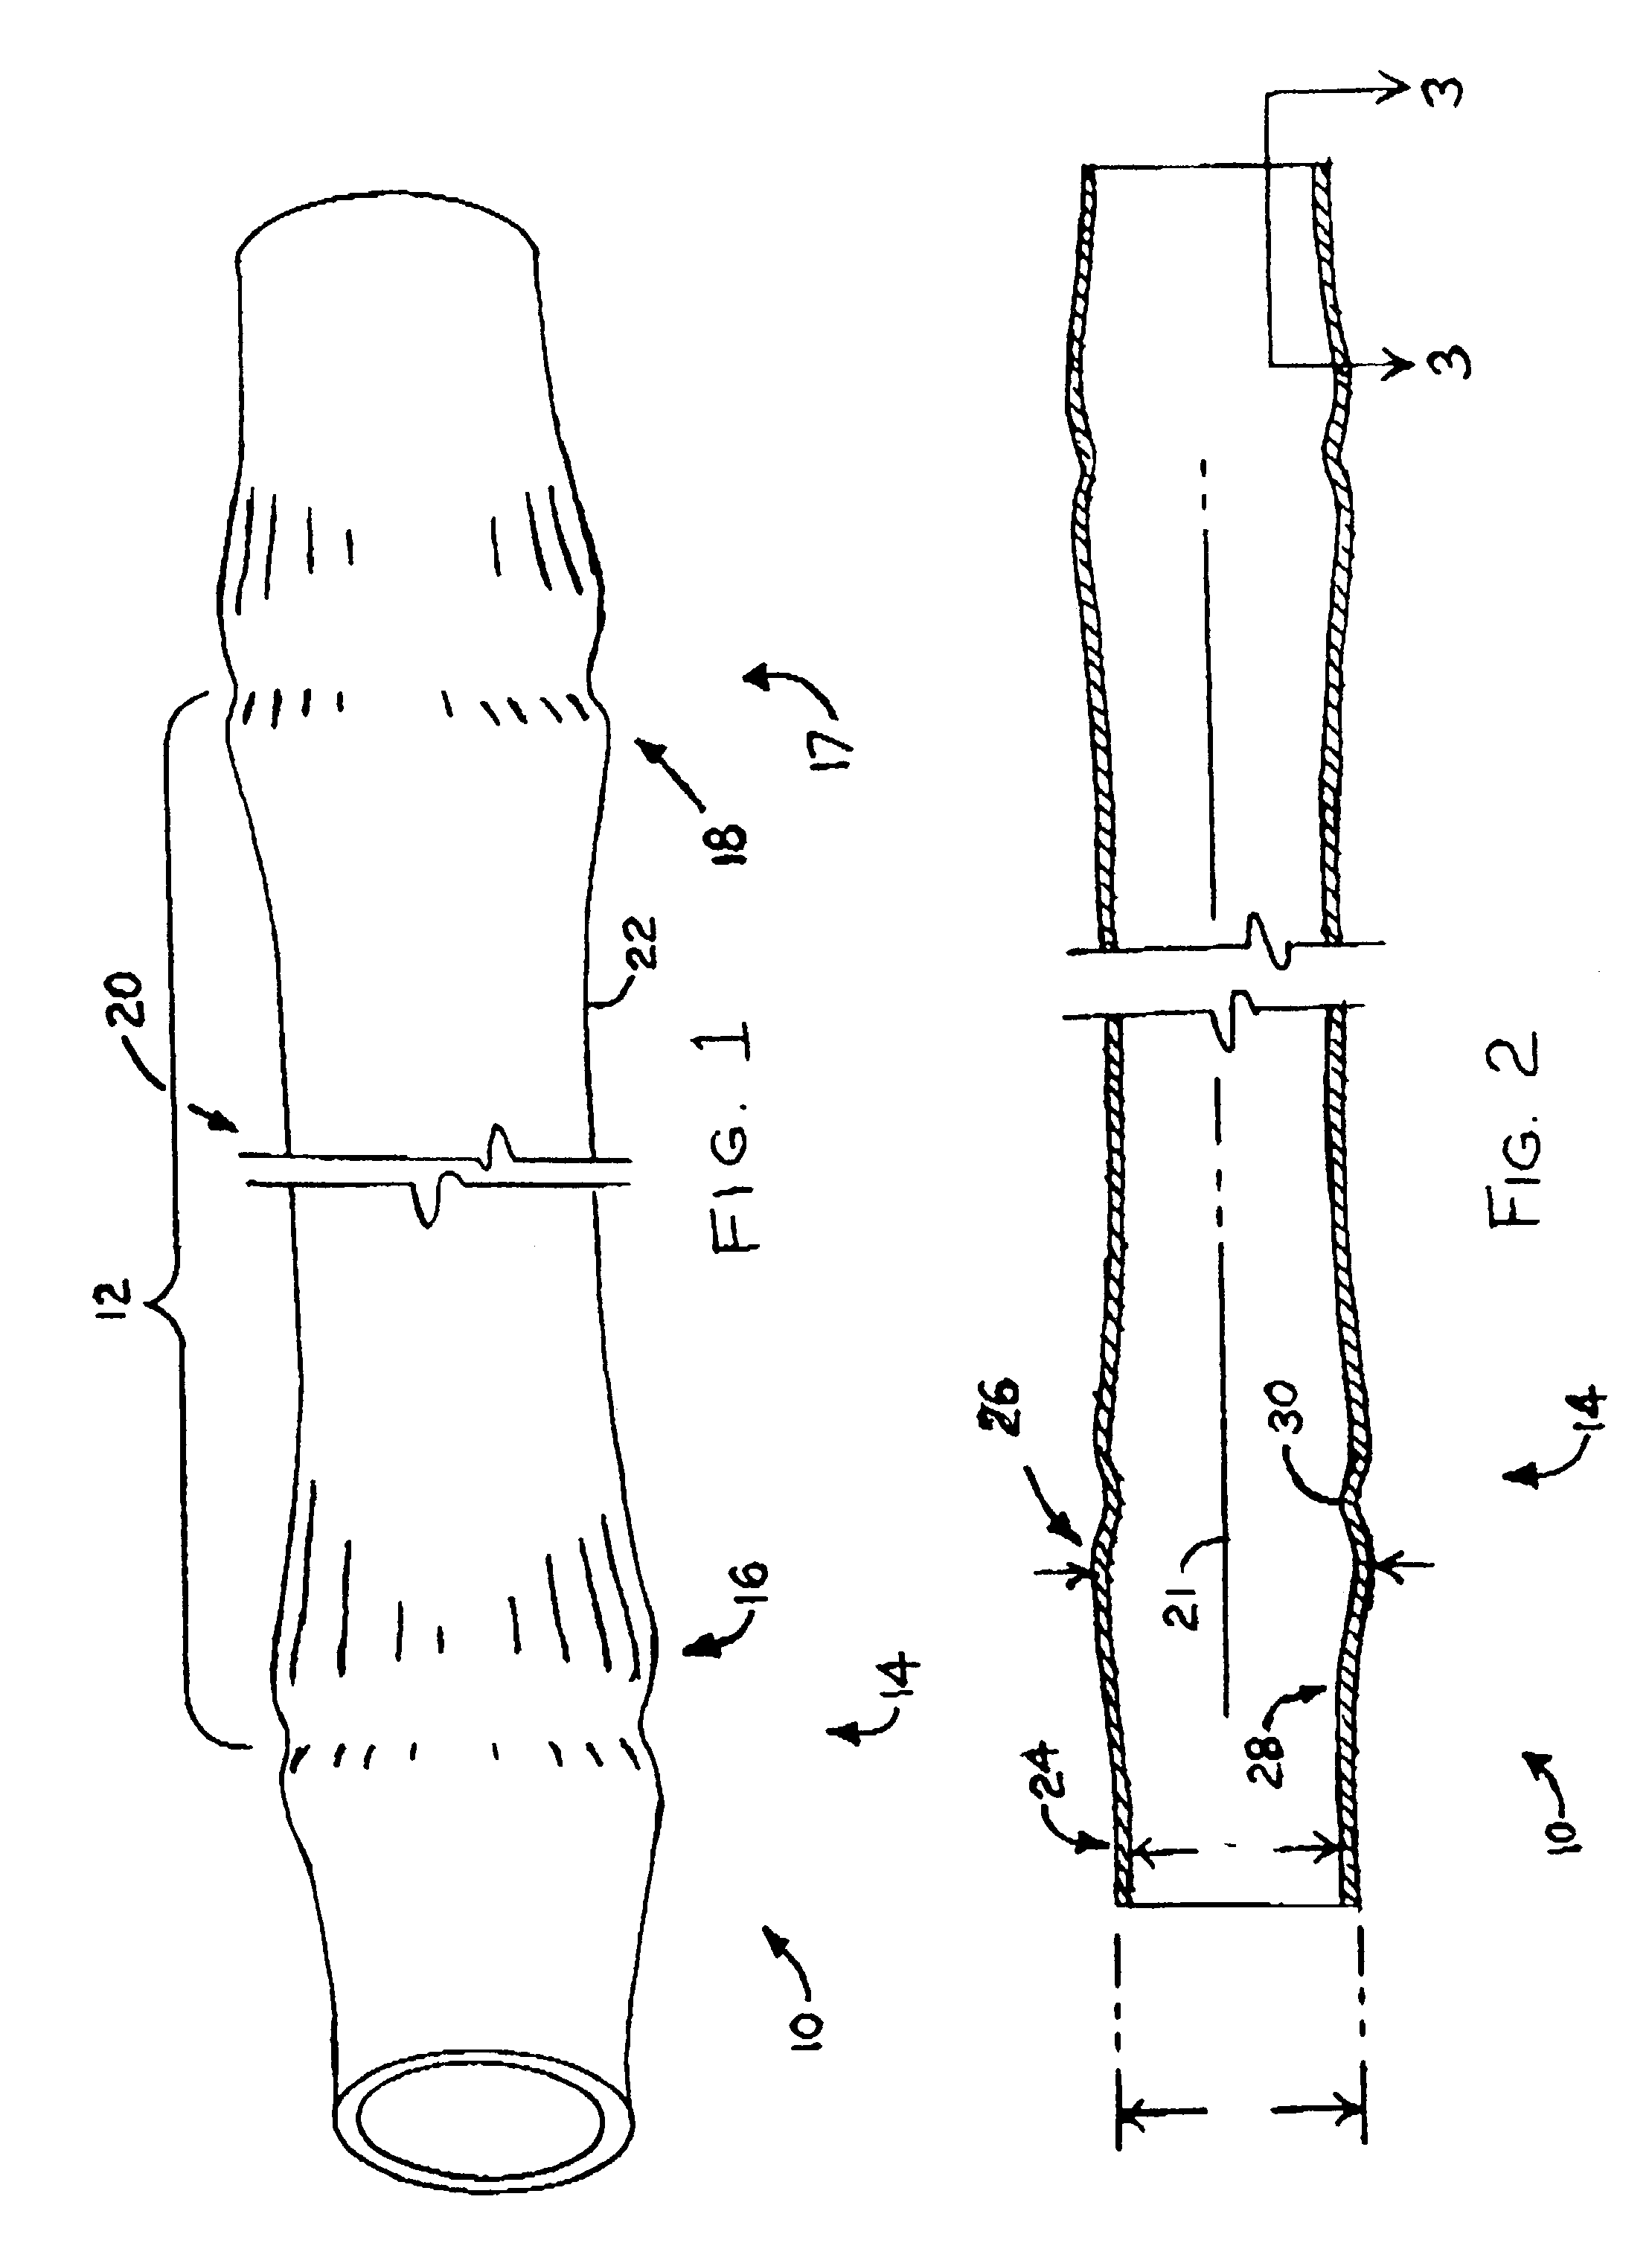 Tubular metallic simulated bamboo, method for manufacturing and articles fabricated therefrom